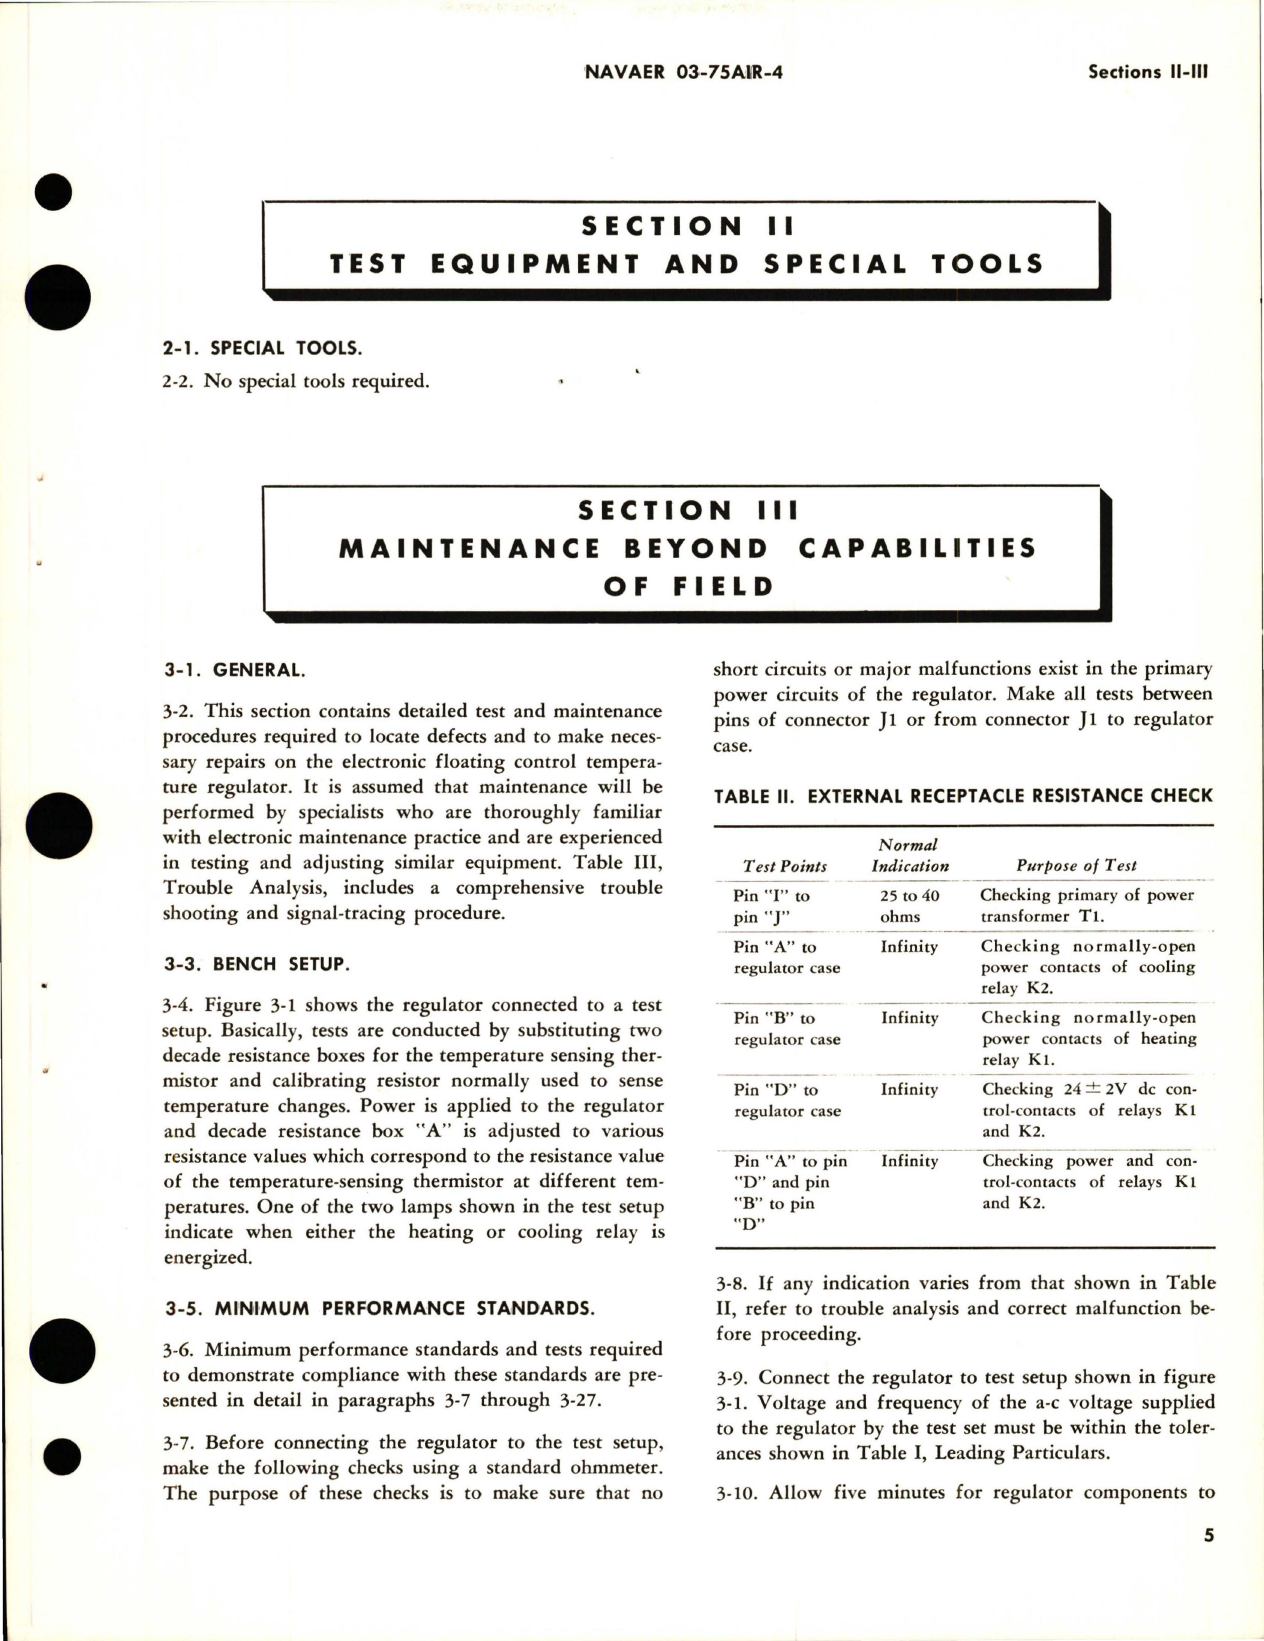 Sample page 7 from AirCorps Library document: Overhaul Instructions for Electronic Floating Control Temperature Regulator - Part 30058-34